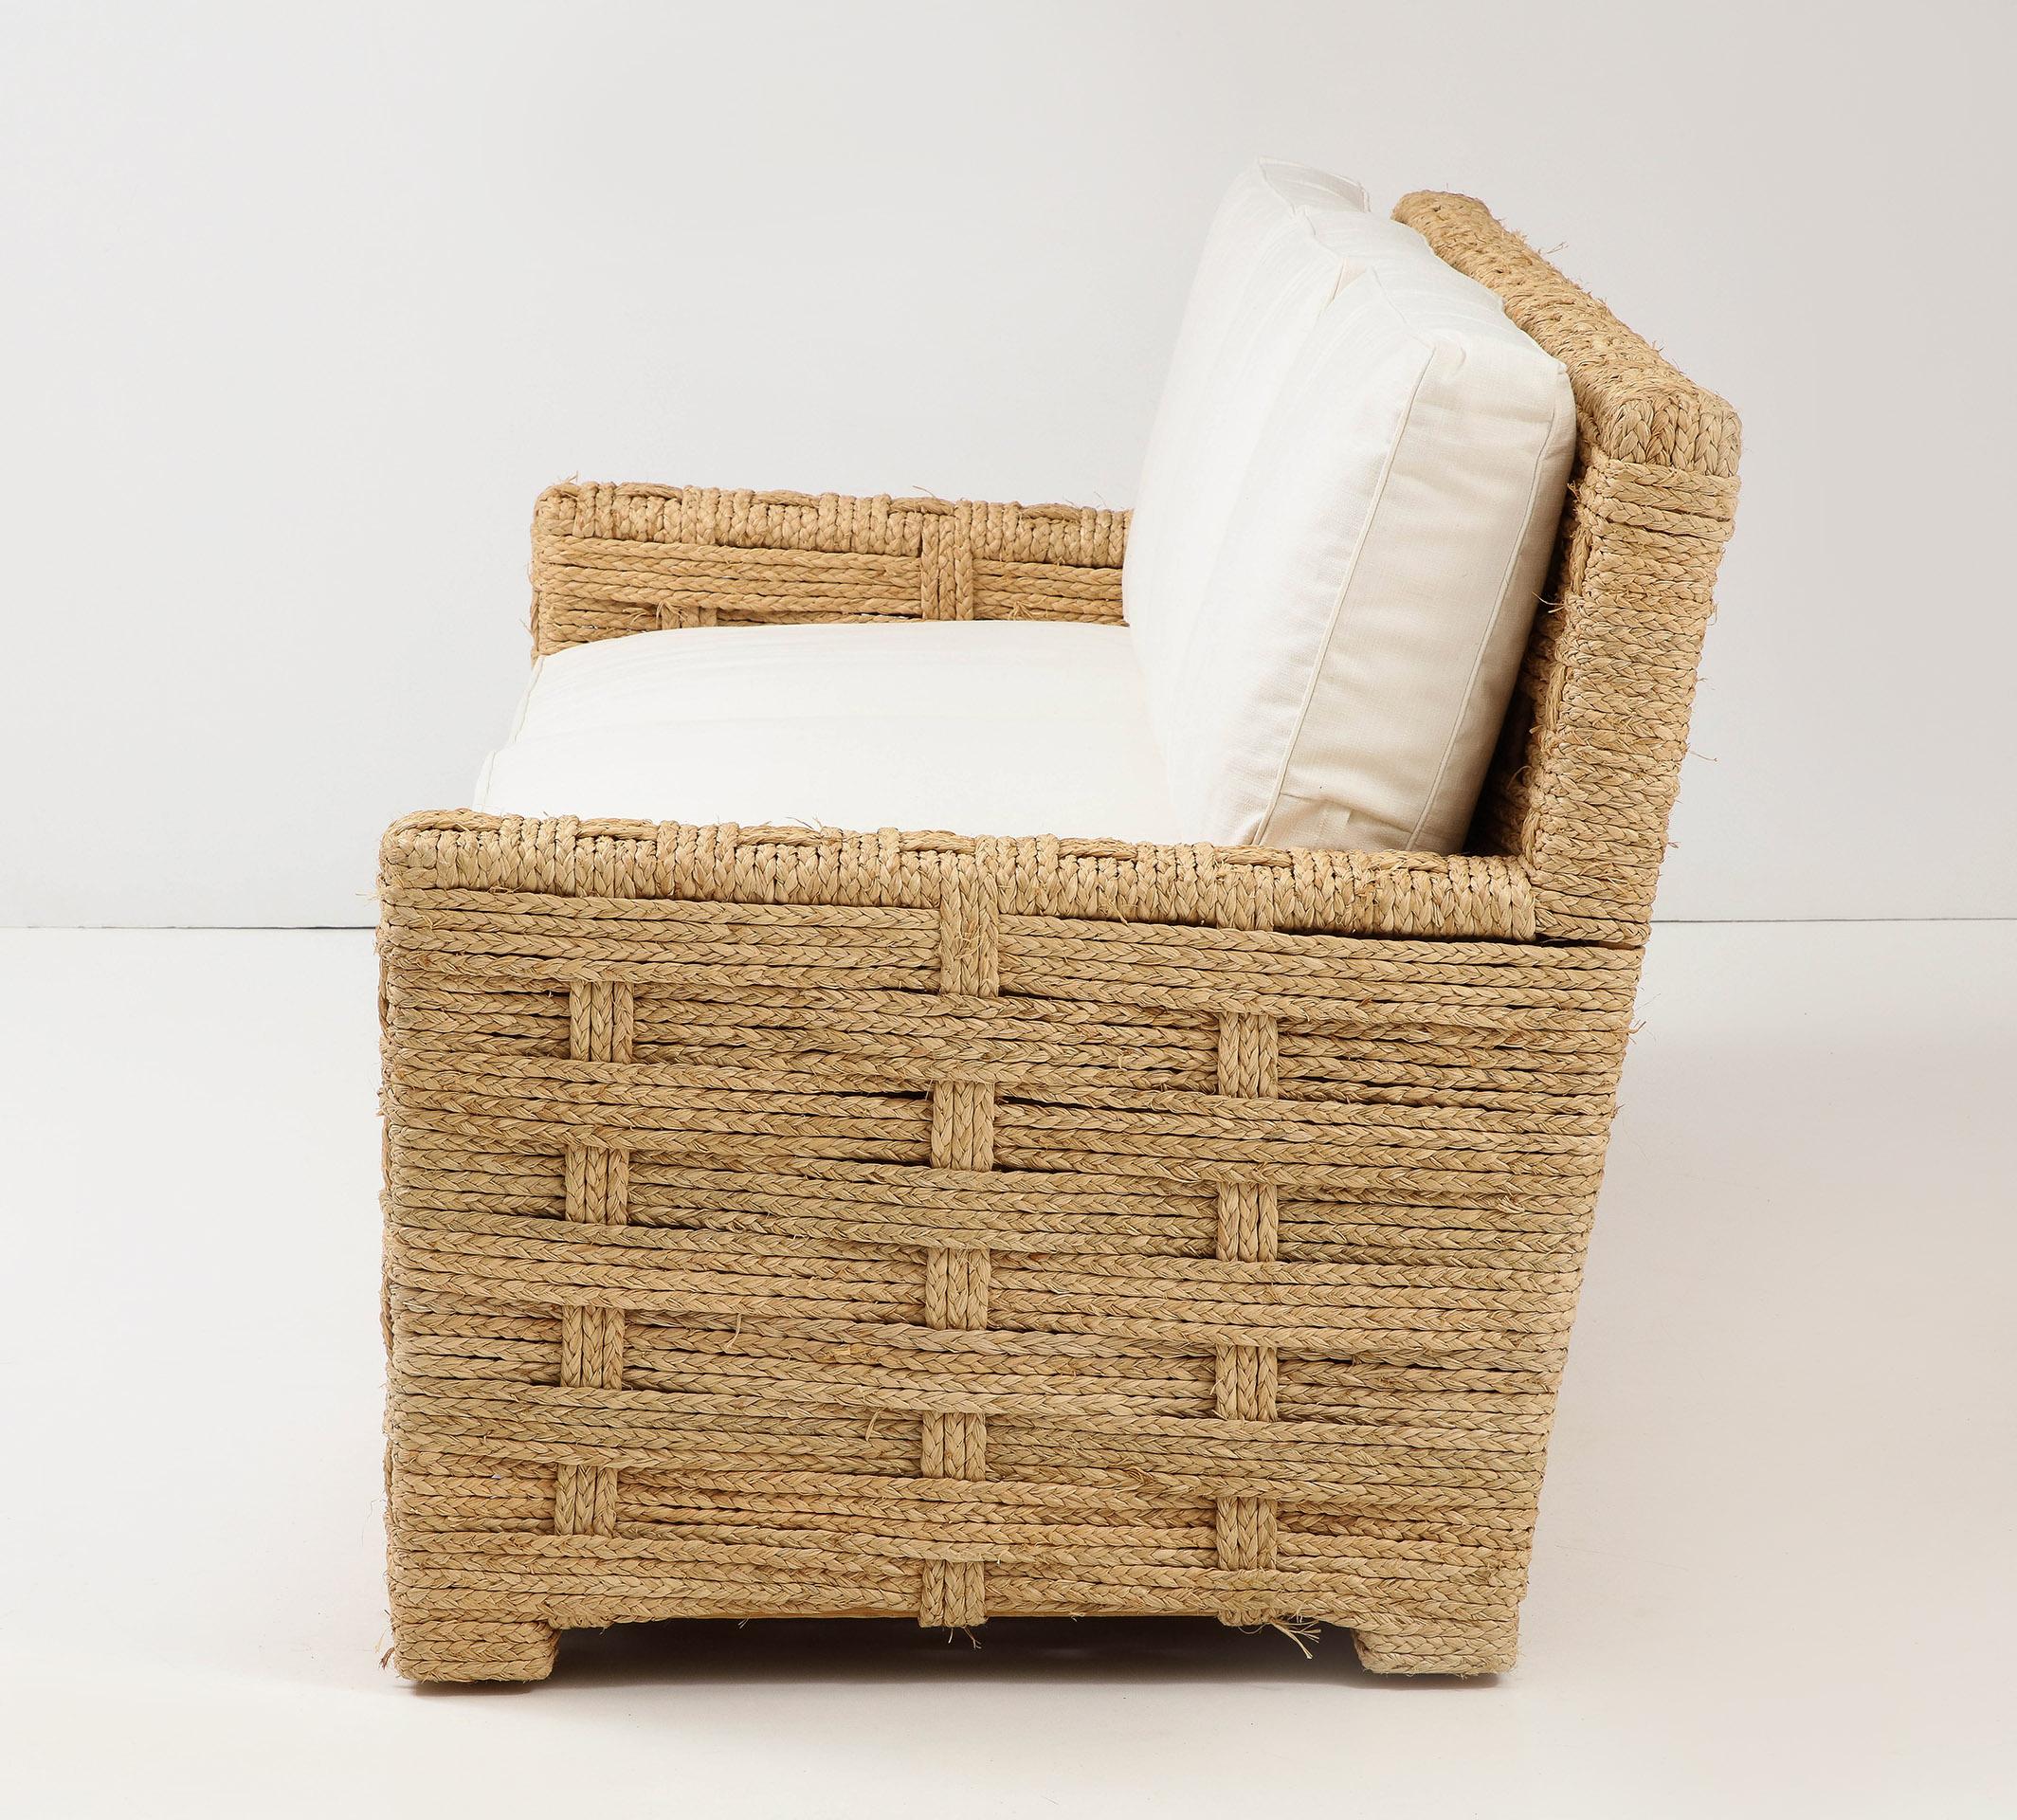 In very fine original condition, the whole is wrapped in braided raffia over an oak frame.
- Seat H. 17.32